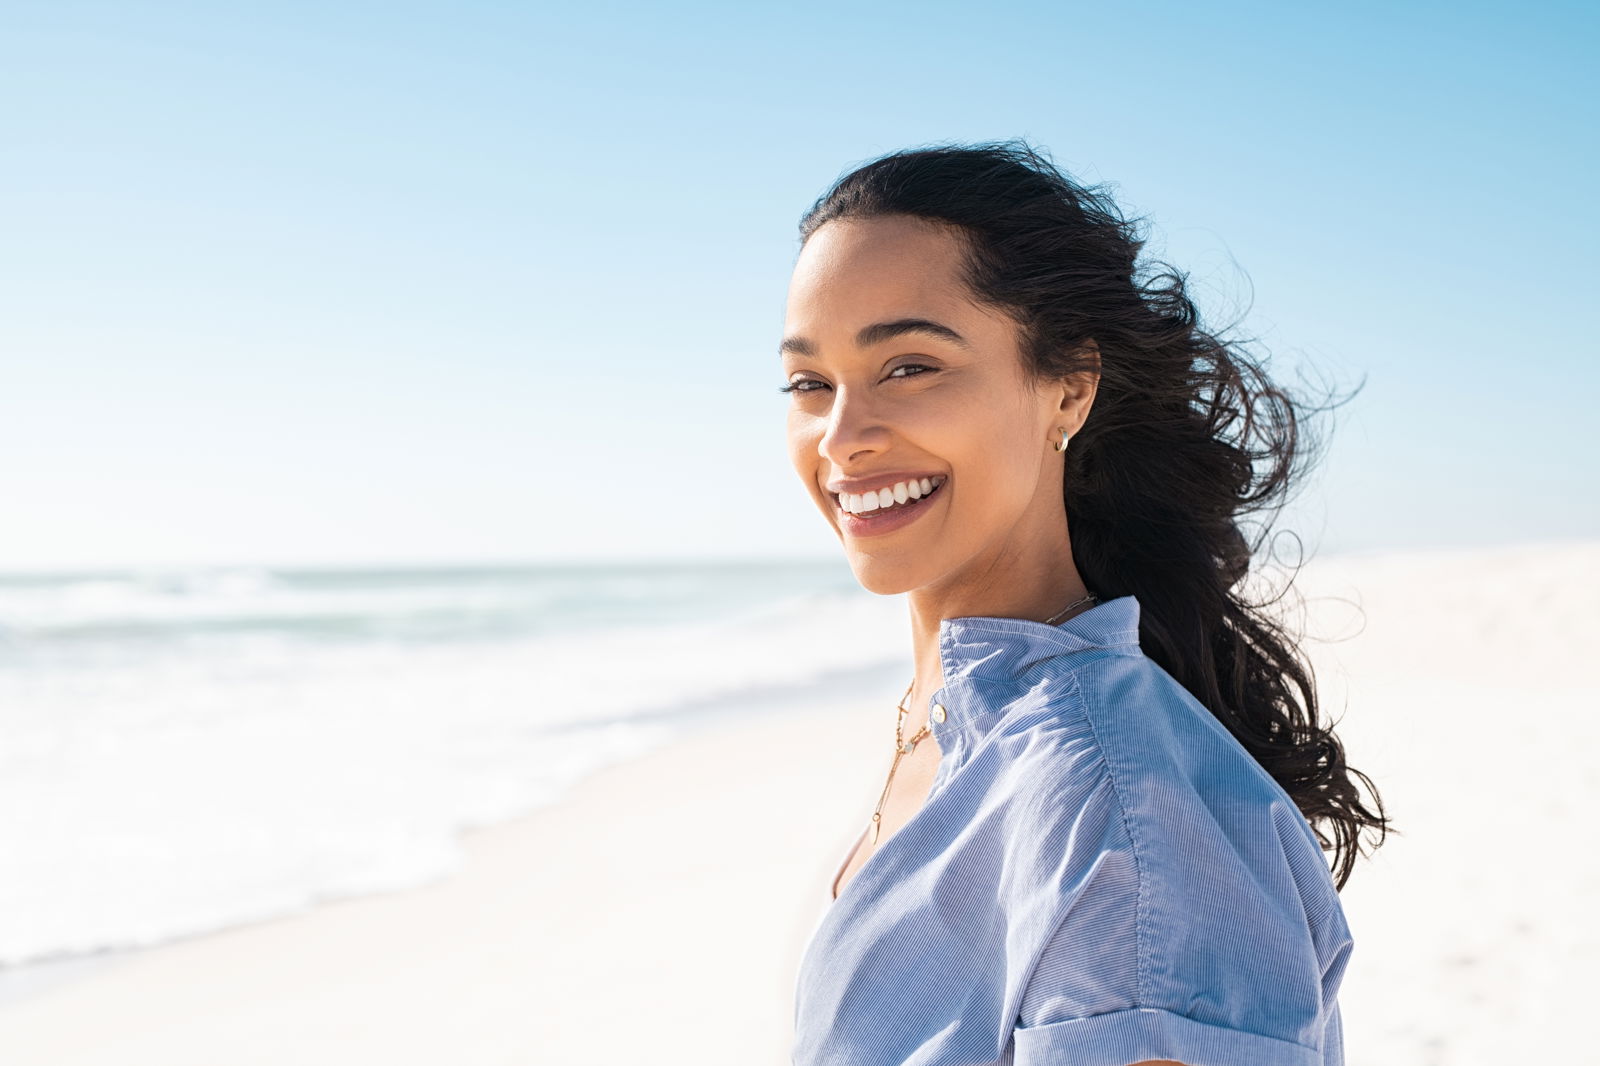 A smiling woman with long hair stands on a beach, wearing a blue shirt, with the ocean and clear sky in the background.